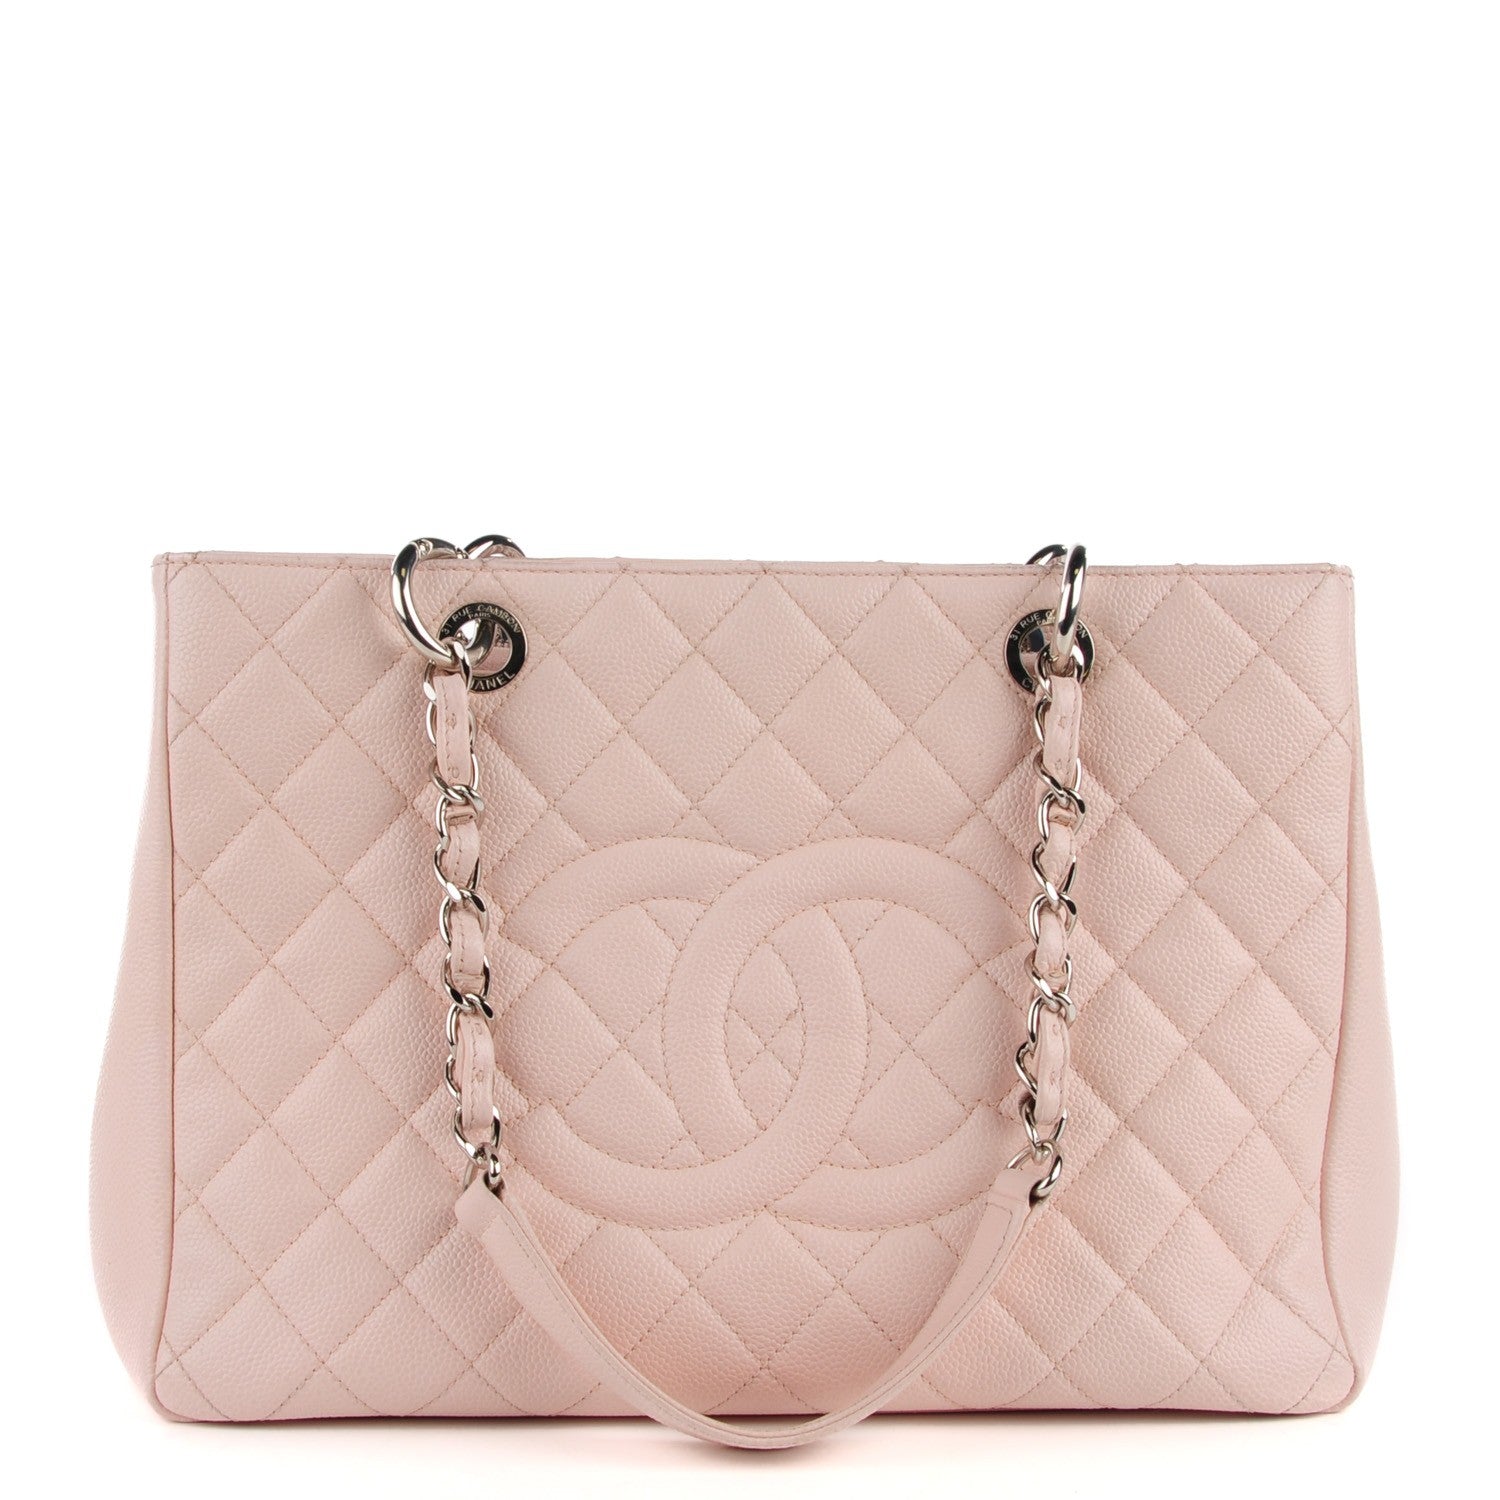 CHANEL GST Leather Exterior Tote Bags & Handbags for Women